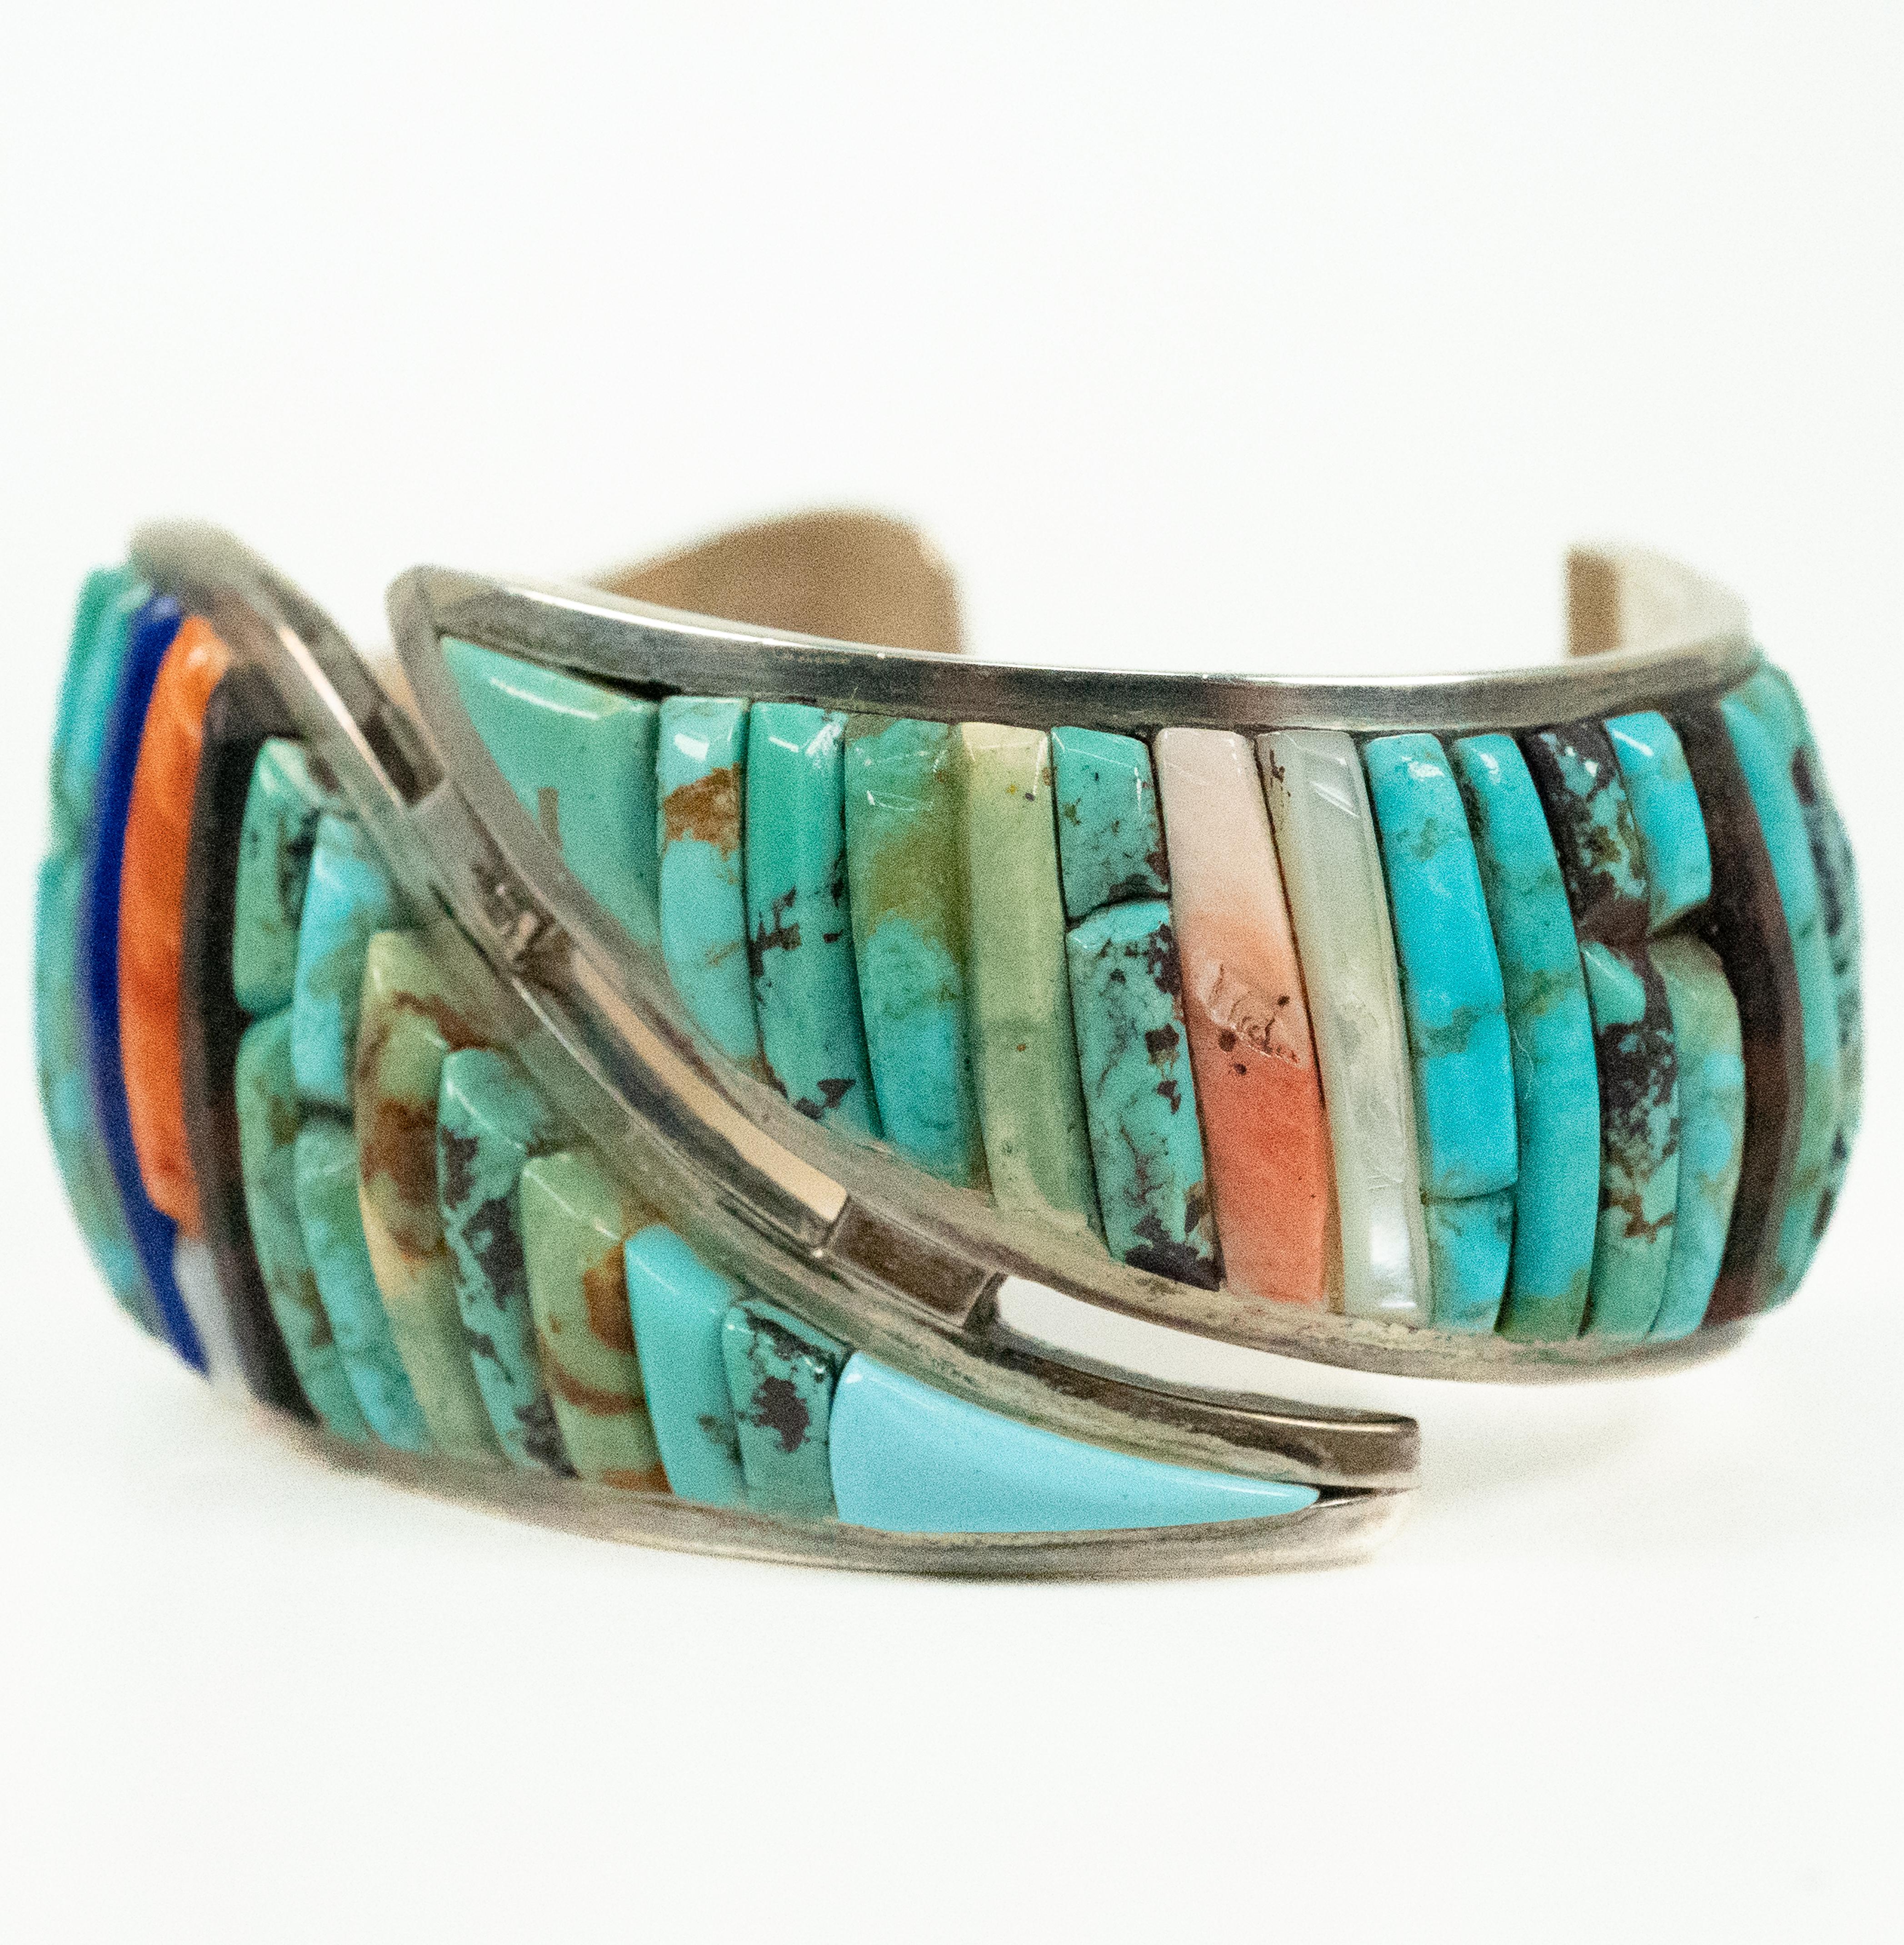 By famed Native American designer Pete Sierra, this unusual sterling silver cuff bracelet features turquoise, lapis lazulli, coral and mother of pearl.